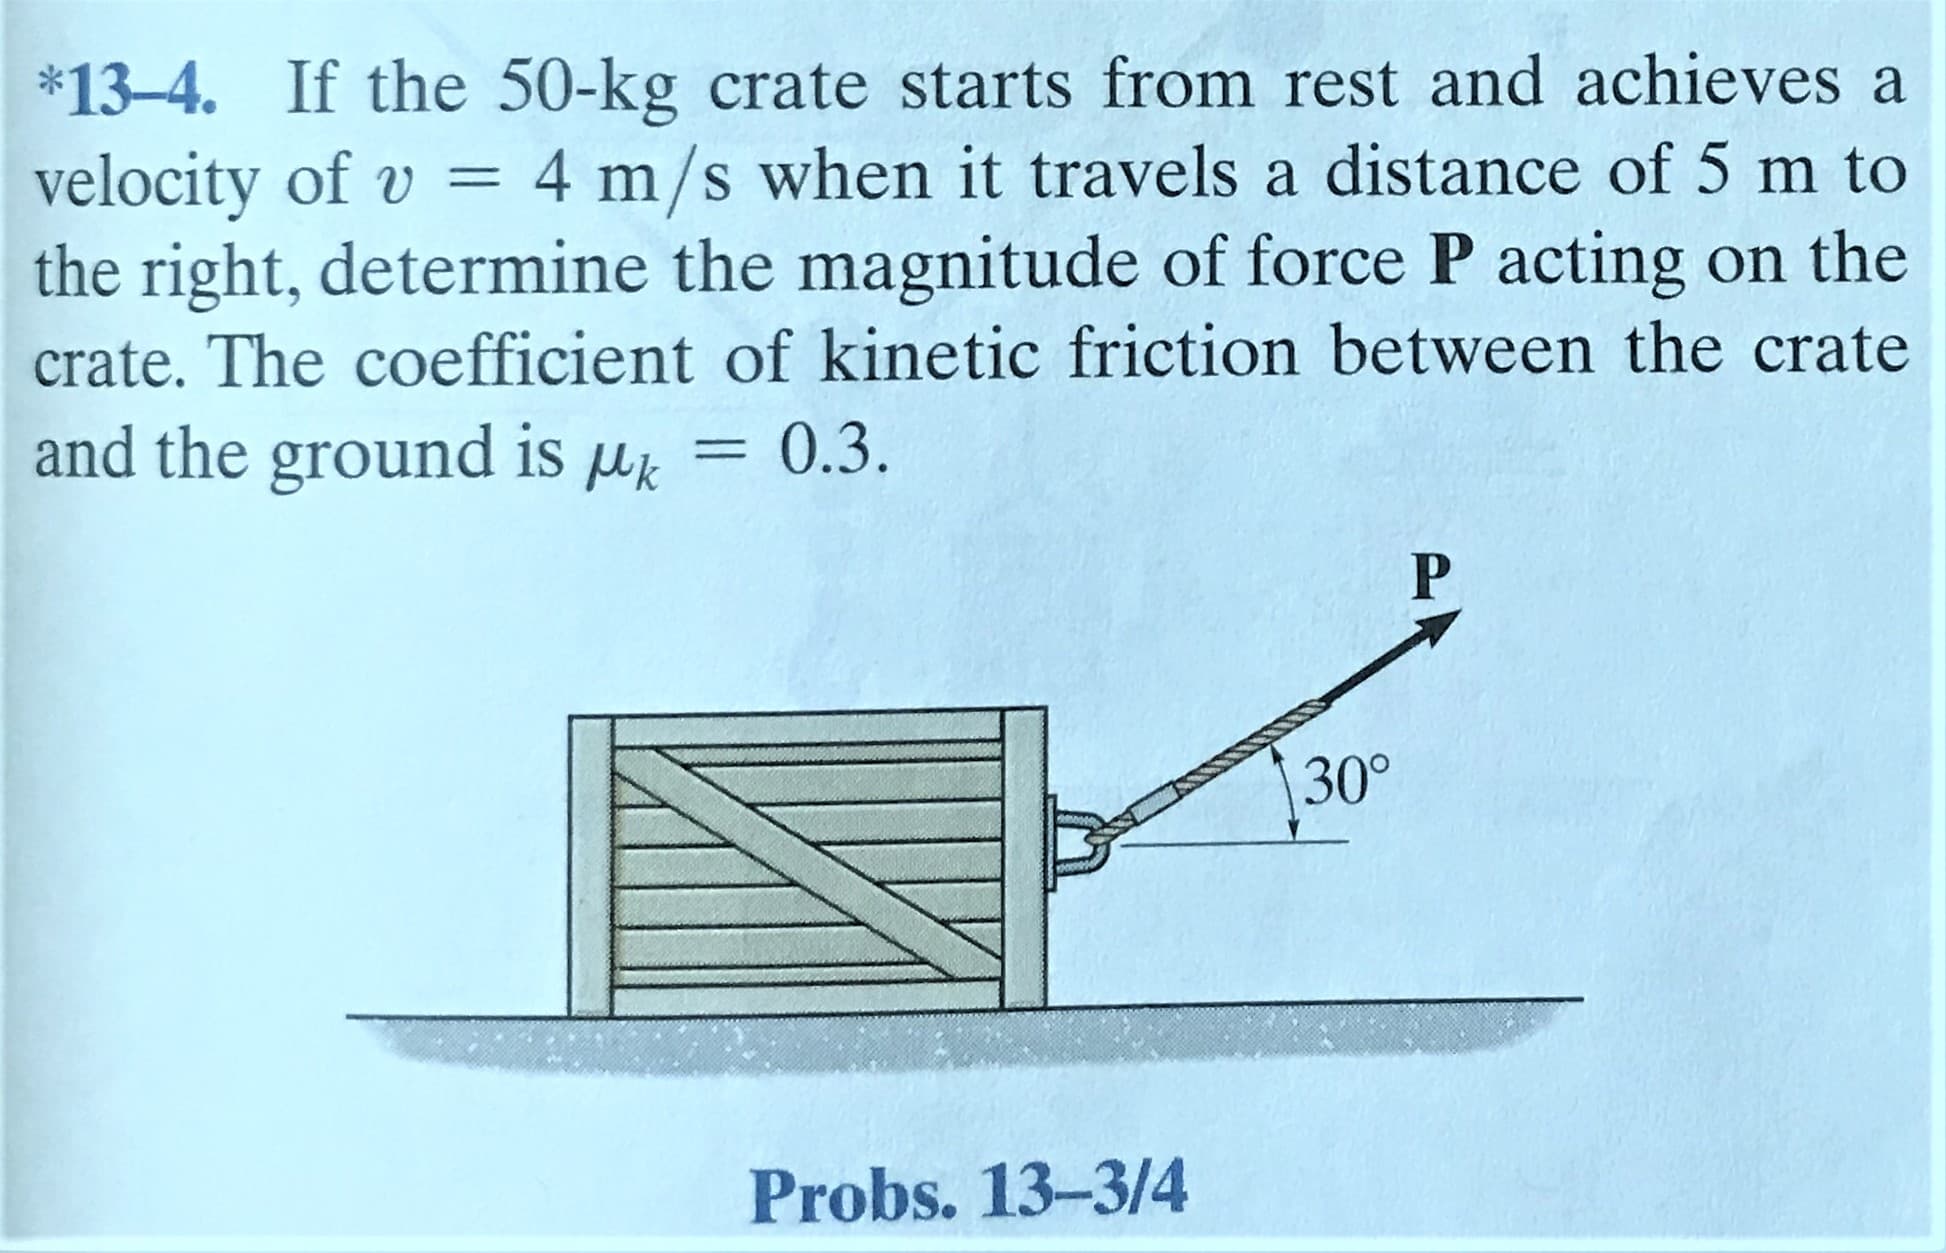 *13-4. If the 50-kg crate starts from rest and achieves a
velocity of v = 4 m/s when it travels a distance of 5 m to
the right, determine the magnitude of force P acting on the
crate. The coefficient of kinetic friction between the crate
and the ground is uk
0.3.
%3D
30°
Probs. 13-3/4
